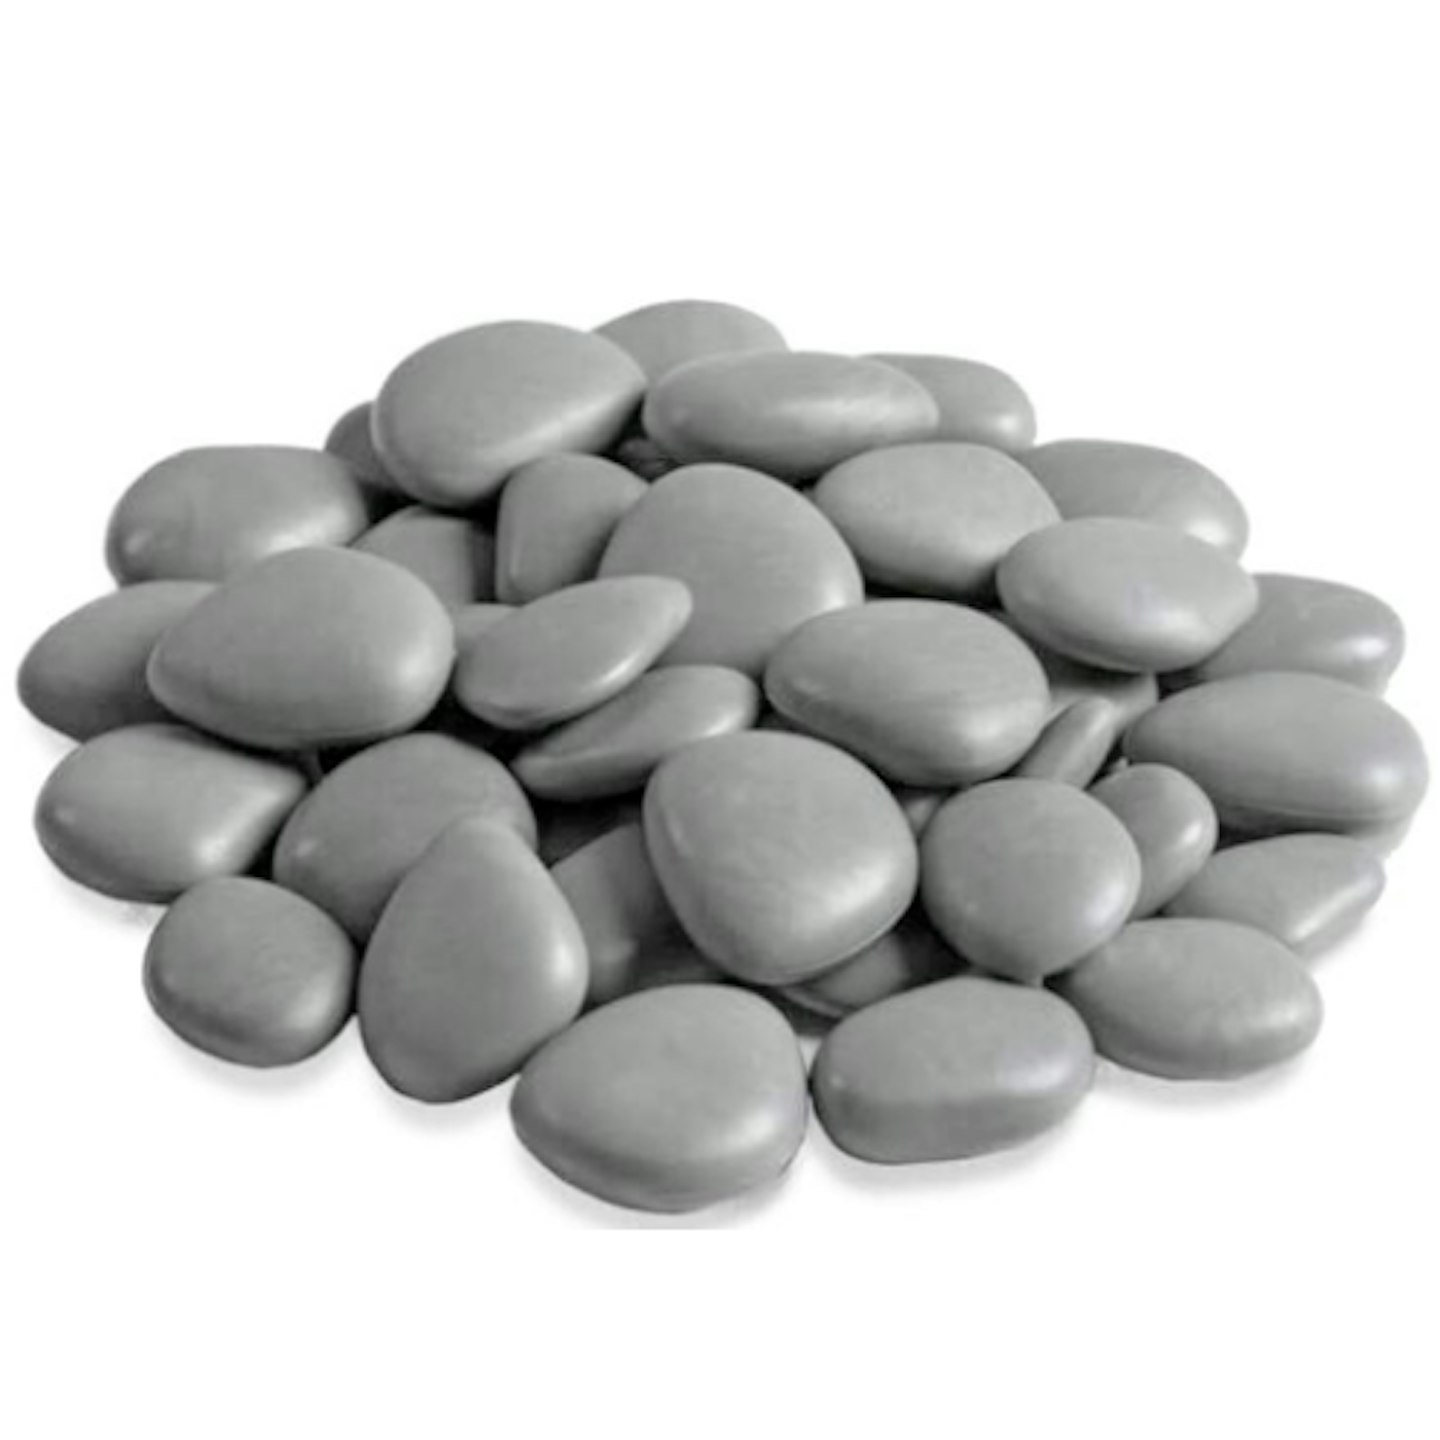 grey recycled plastic pot topper stones